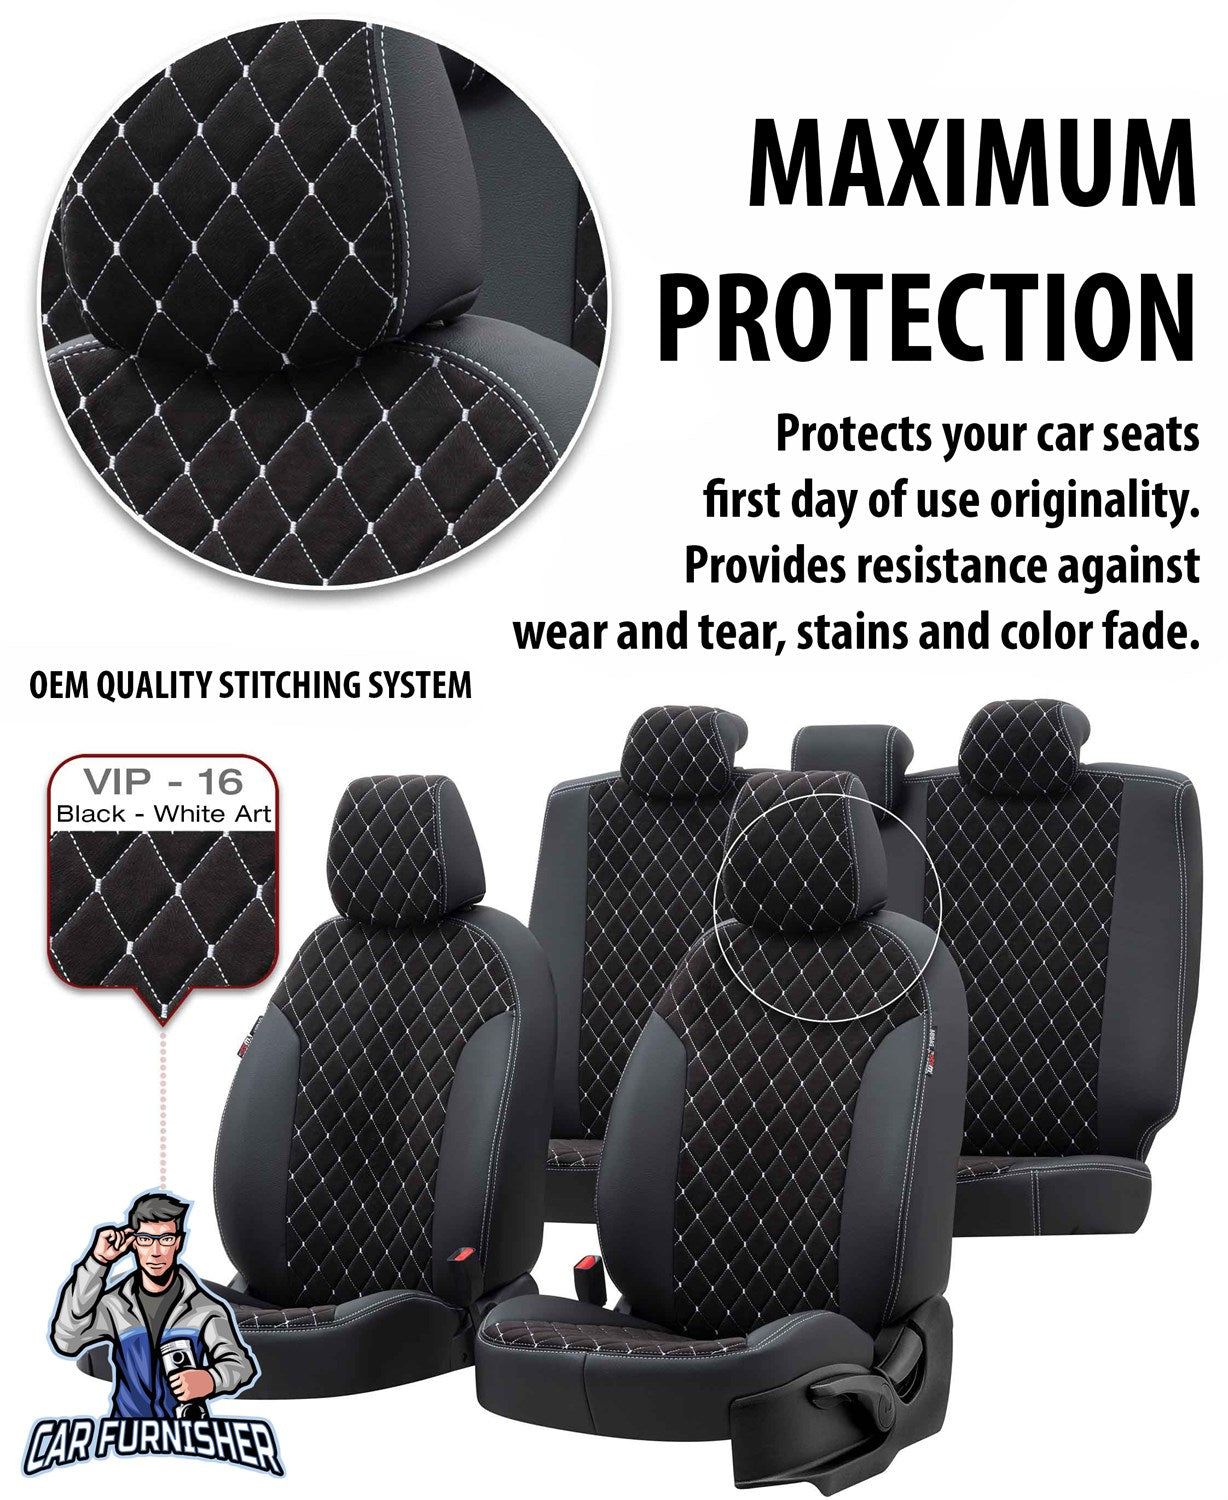 Nissan NV300 Seat Cover Camouflage Waterproof Design Dark Red Leather & Foal Feather